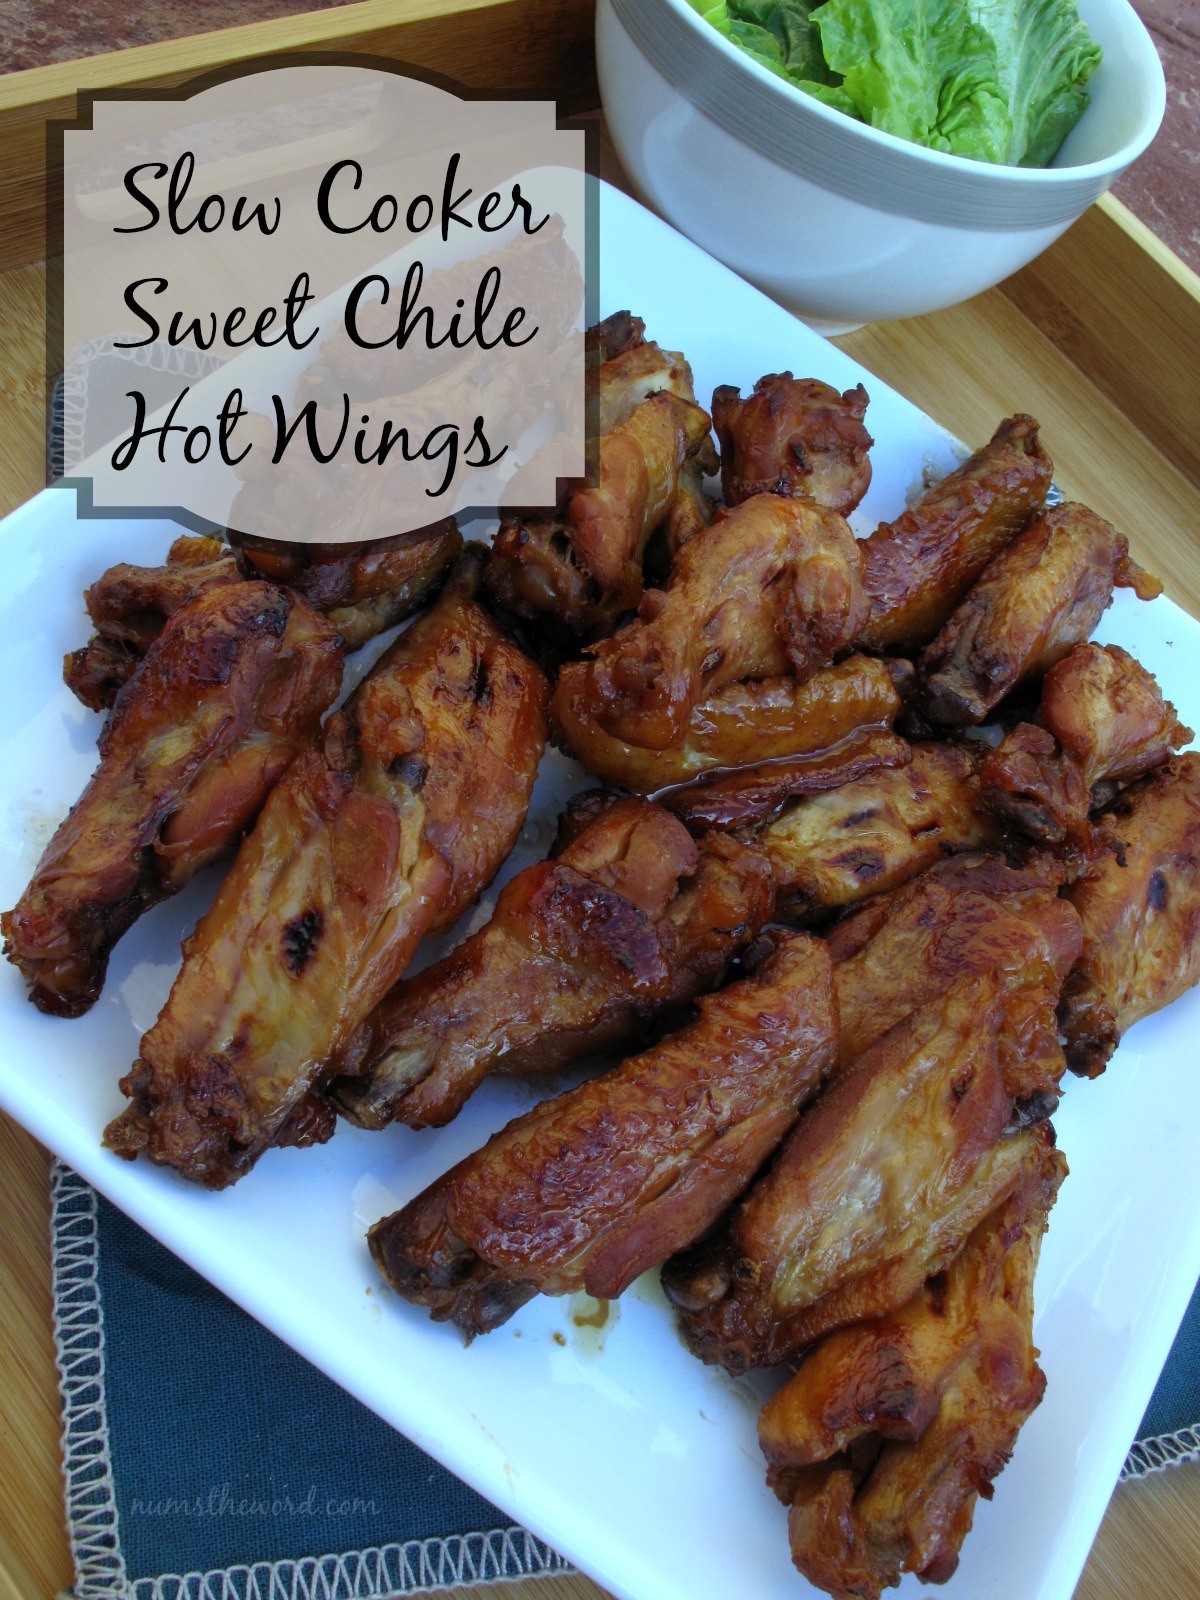 Slow Cooker Sweet Chile Hot Wings